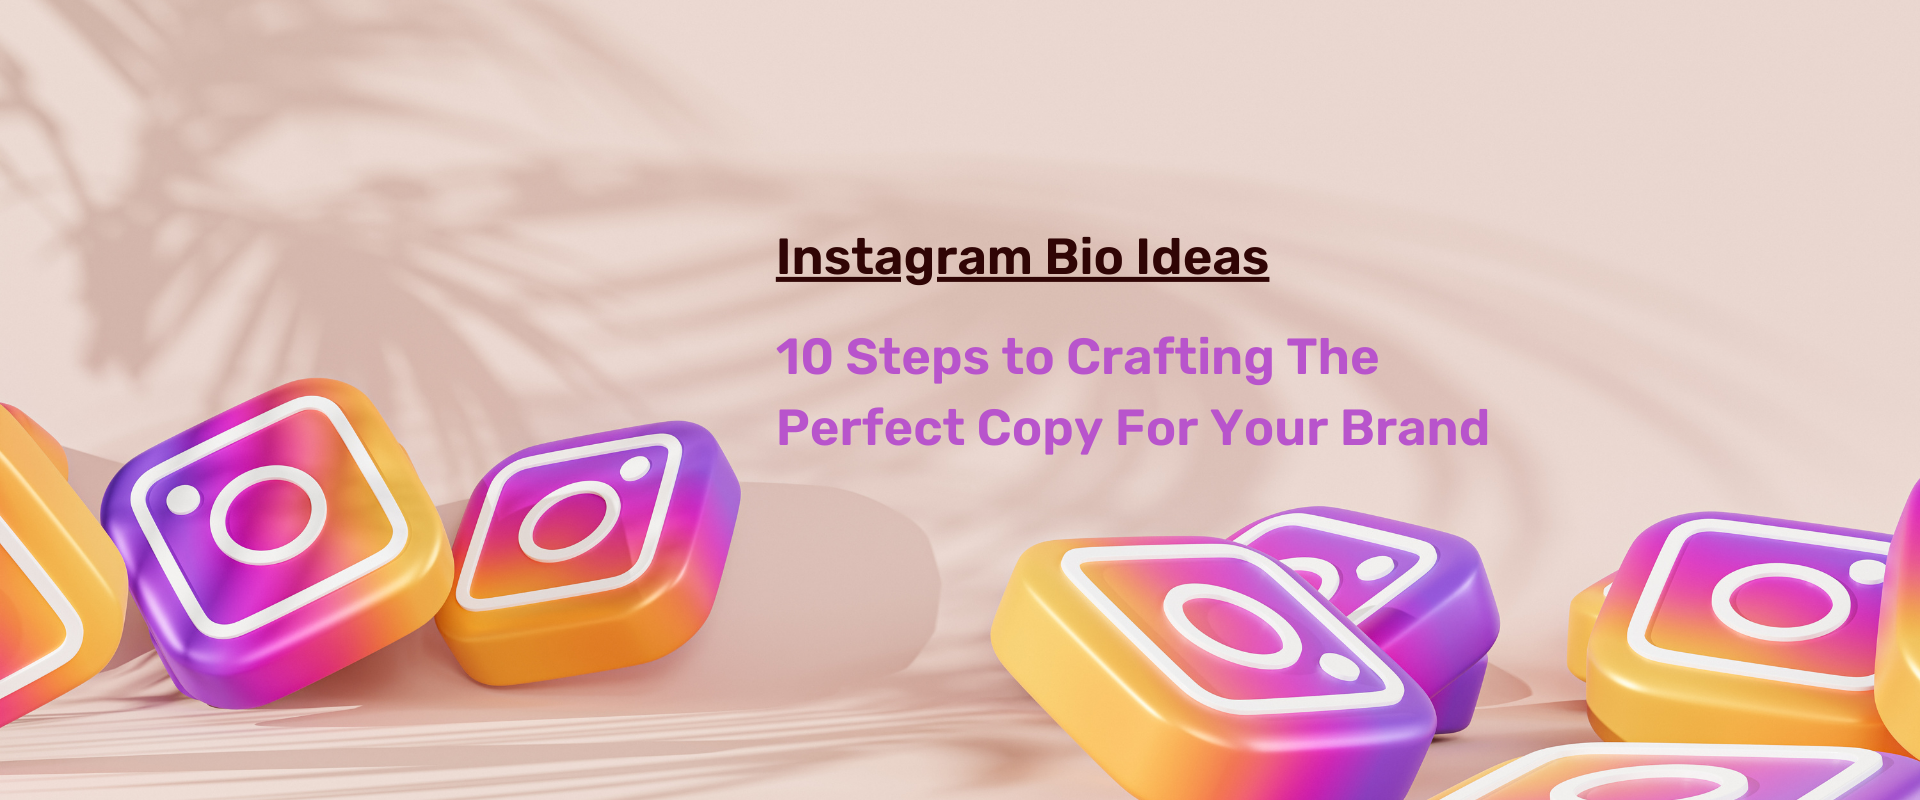 Instagram Bio Ideas: 10 Steps to Crafting The Perfect Copy For Your Brand